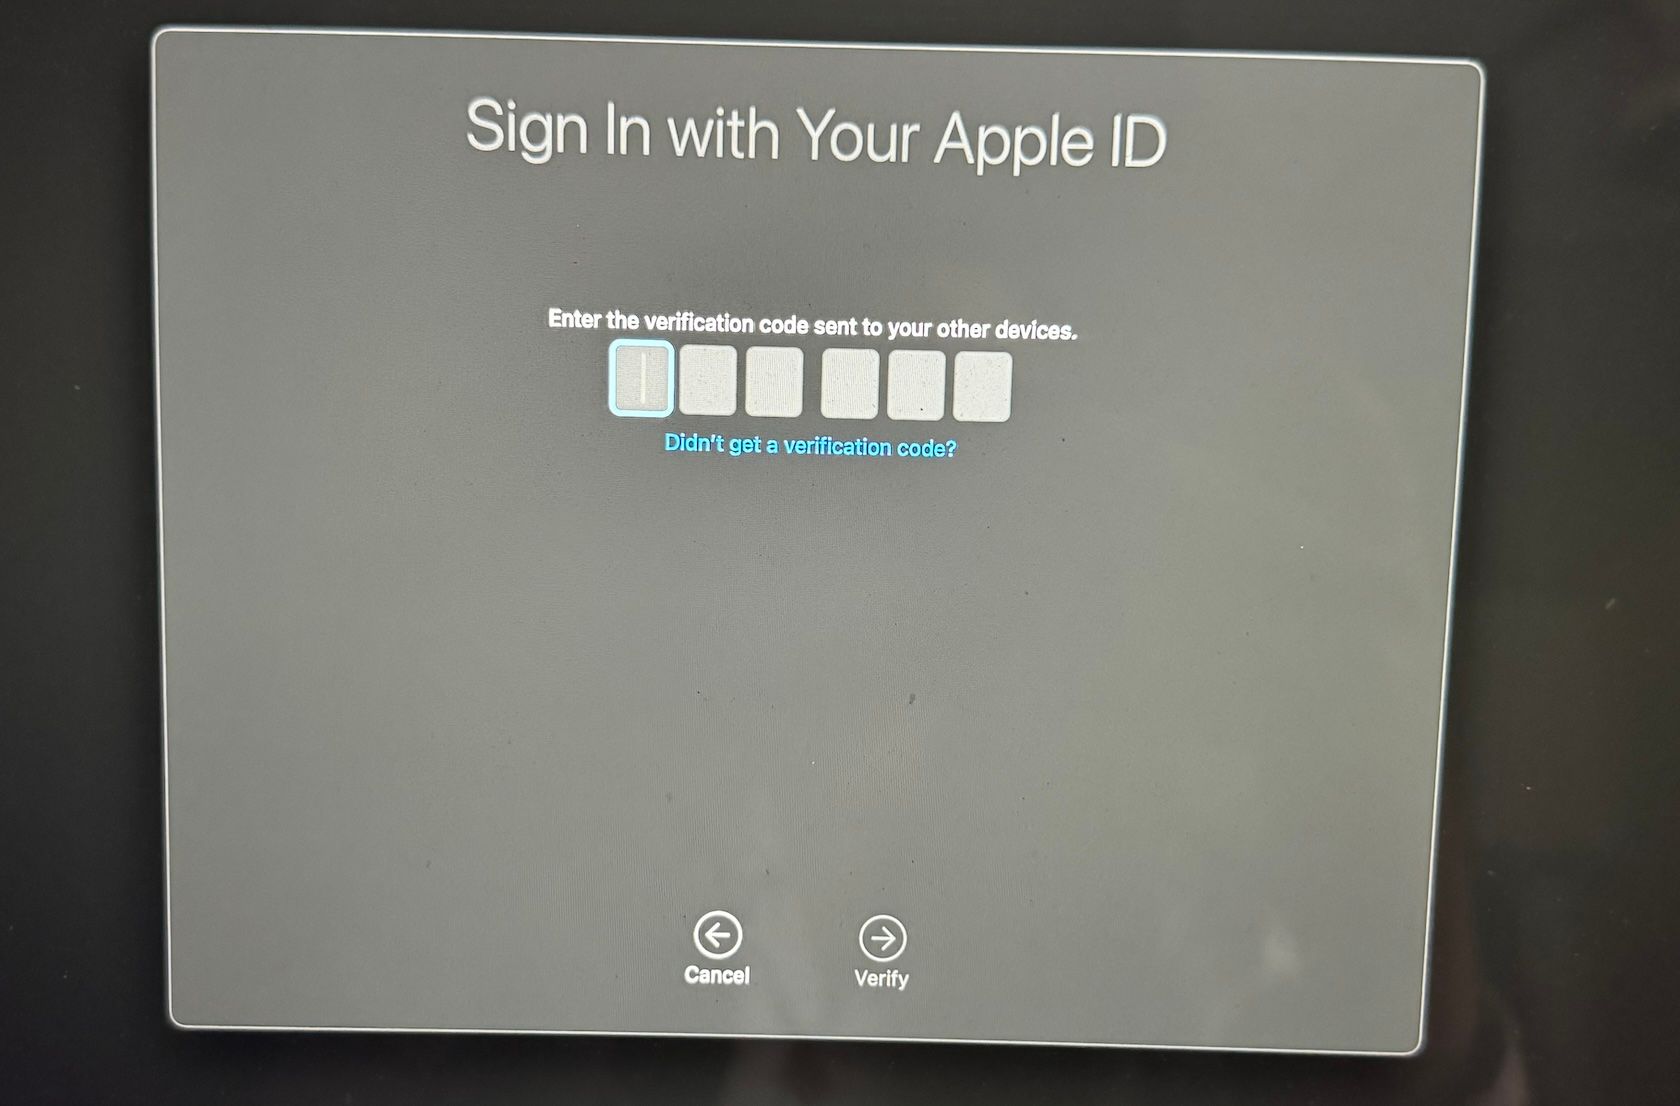 entering verification code to sign in with Apple ID on macOS